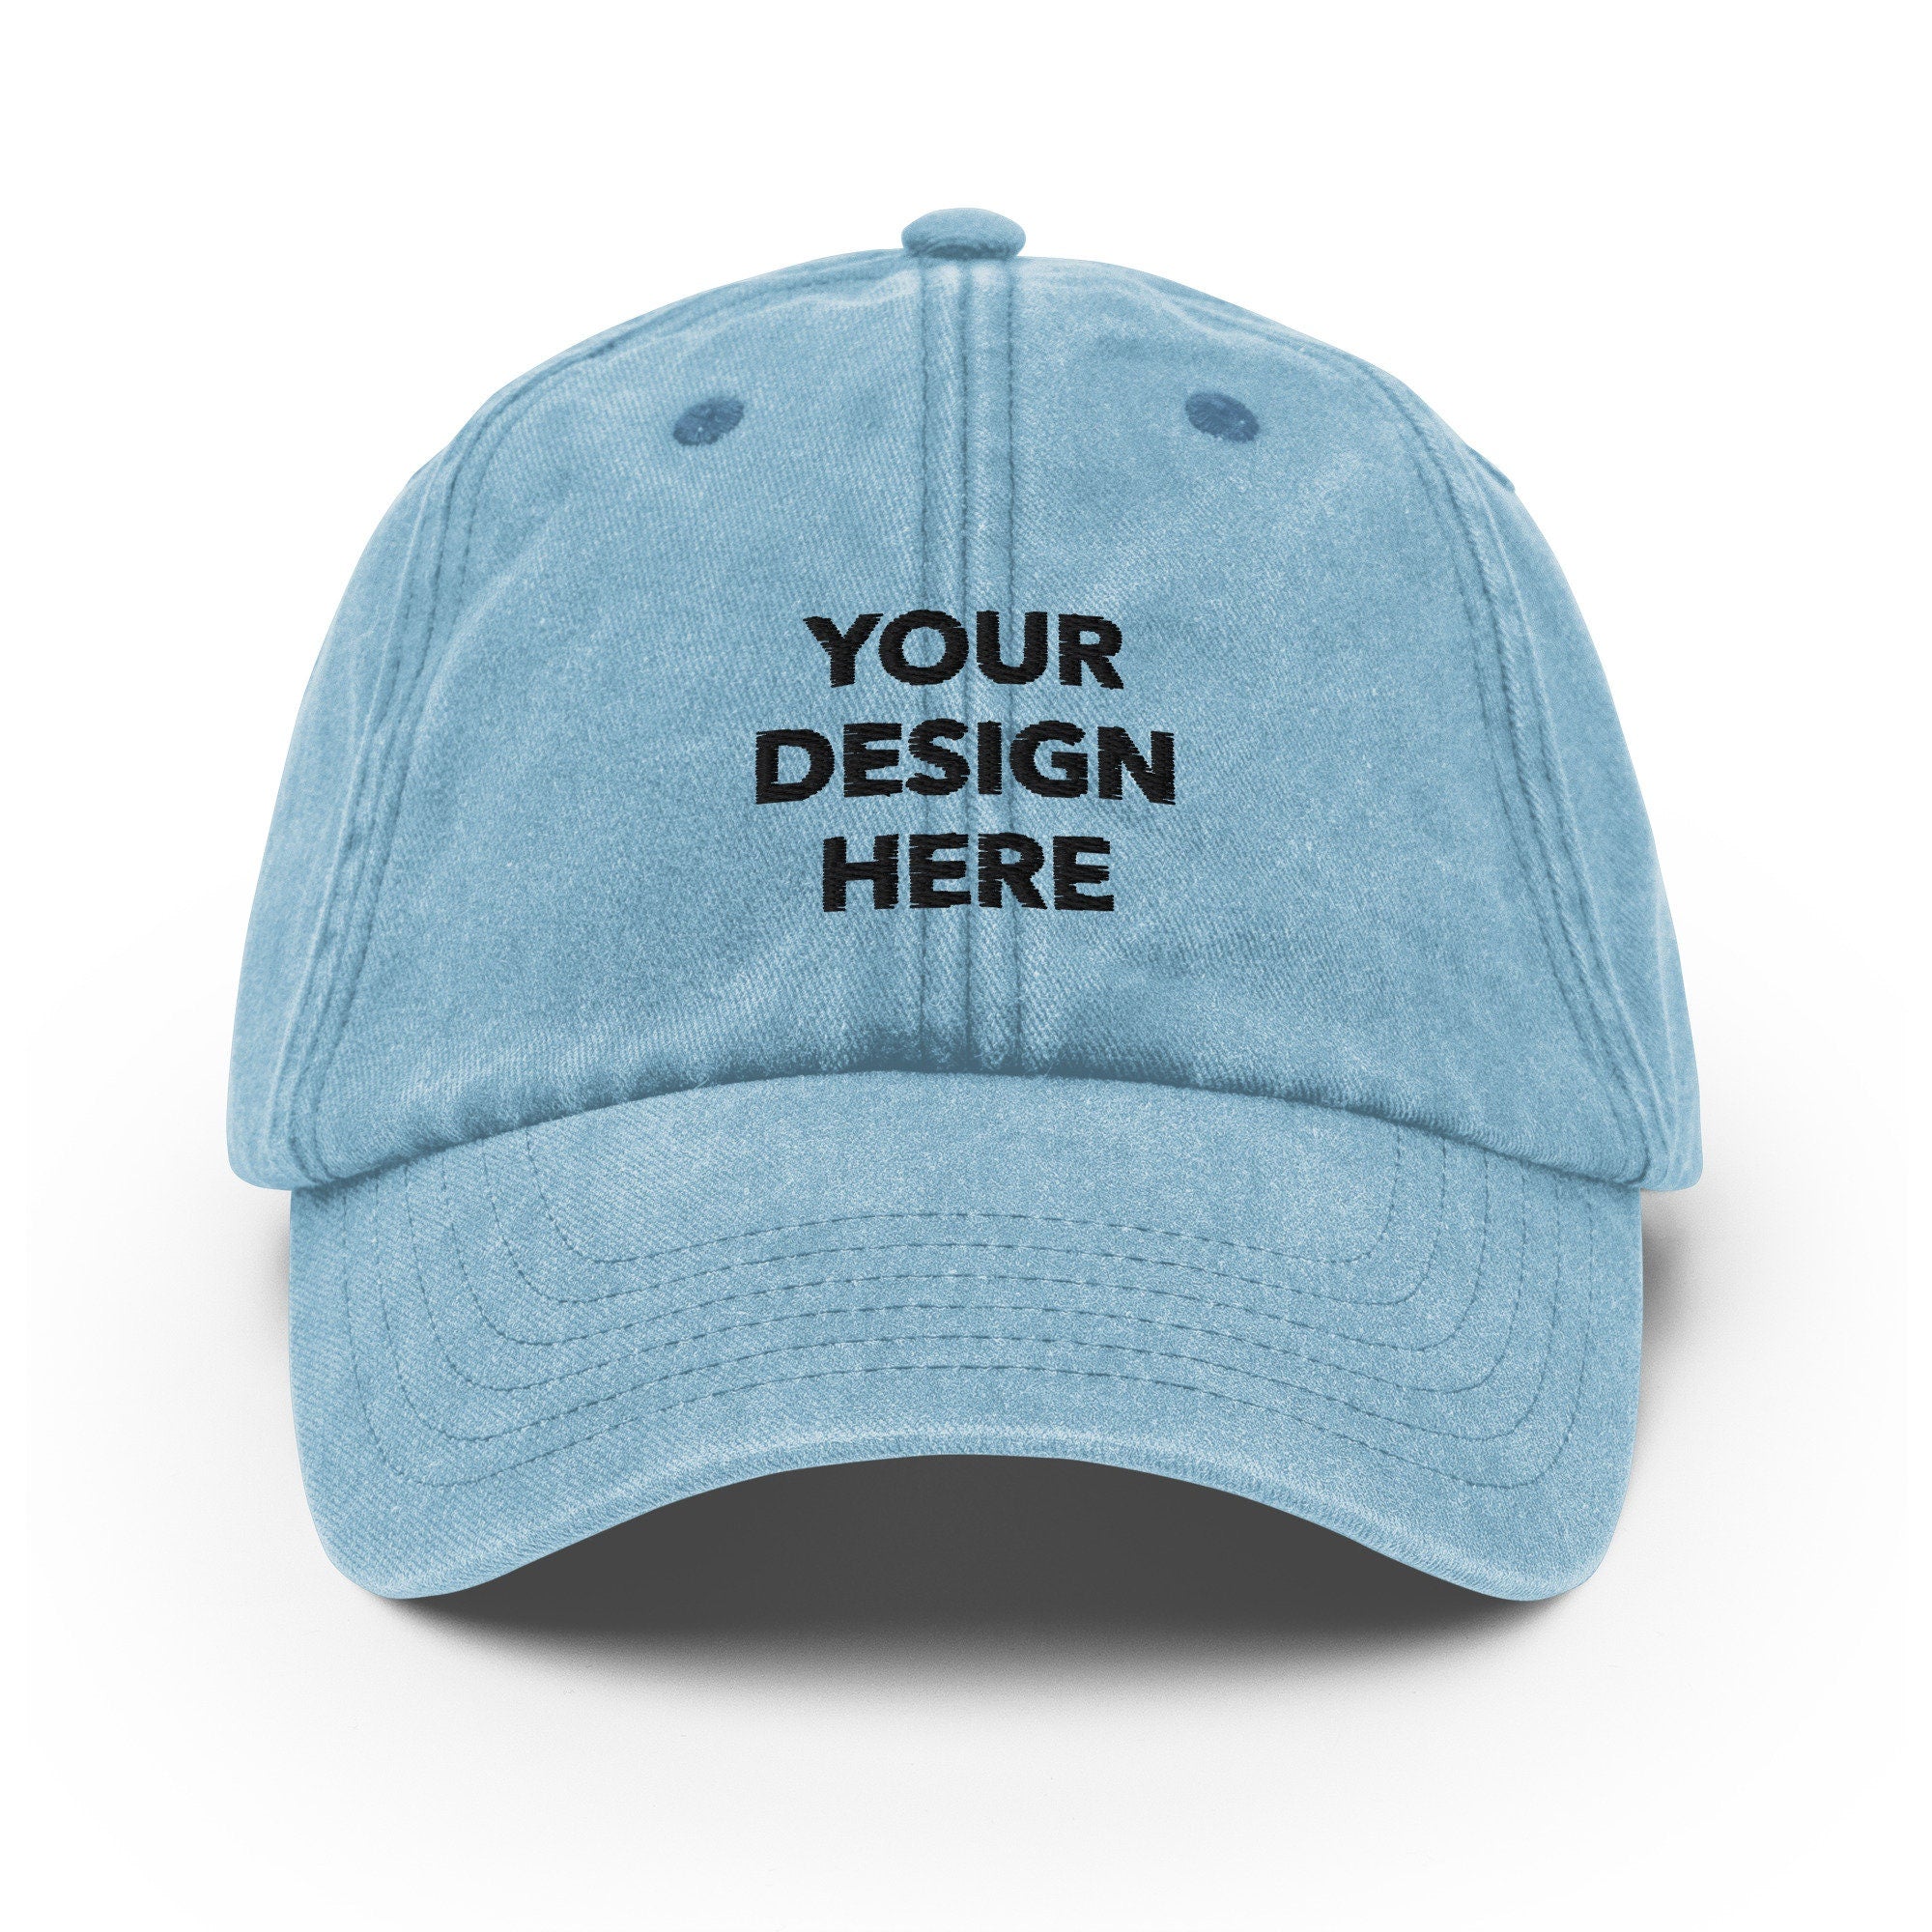 Personalized Embroidered Vintage Hat, Customized Logo Hat, Embroidery with Your Own Text or Design, Handmade Custom Aged Cap Vintage Light Denim